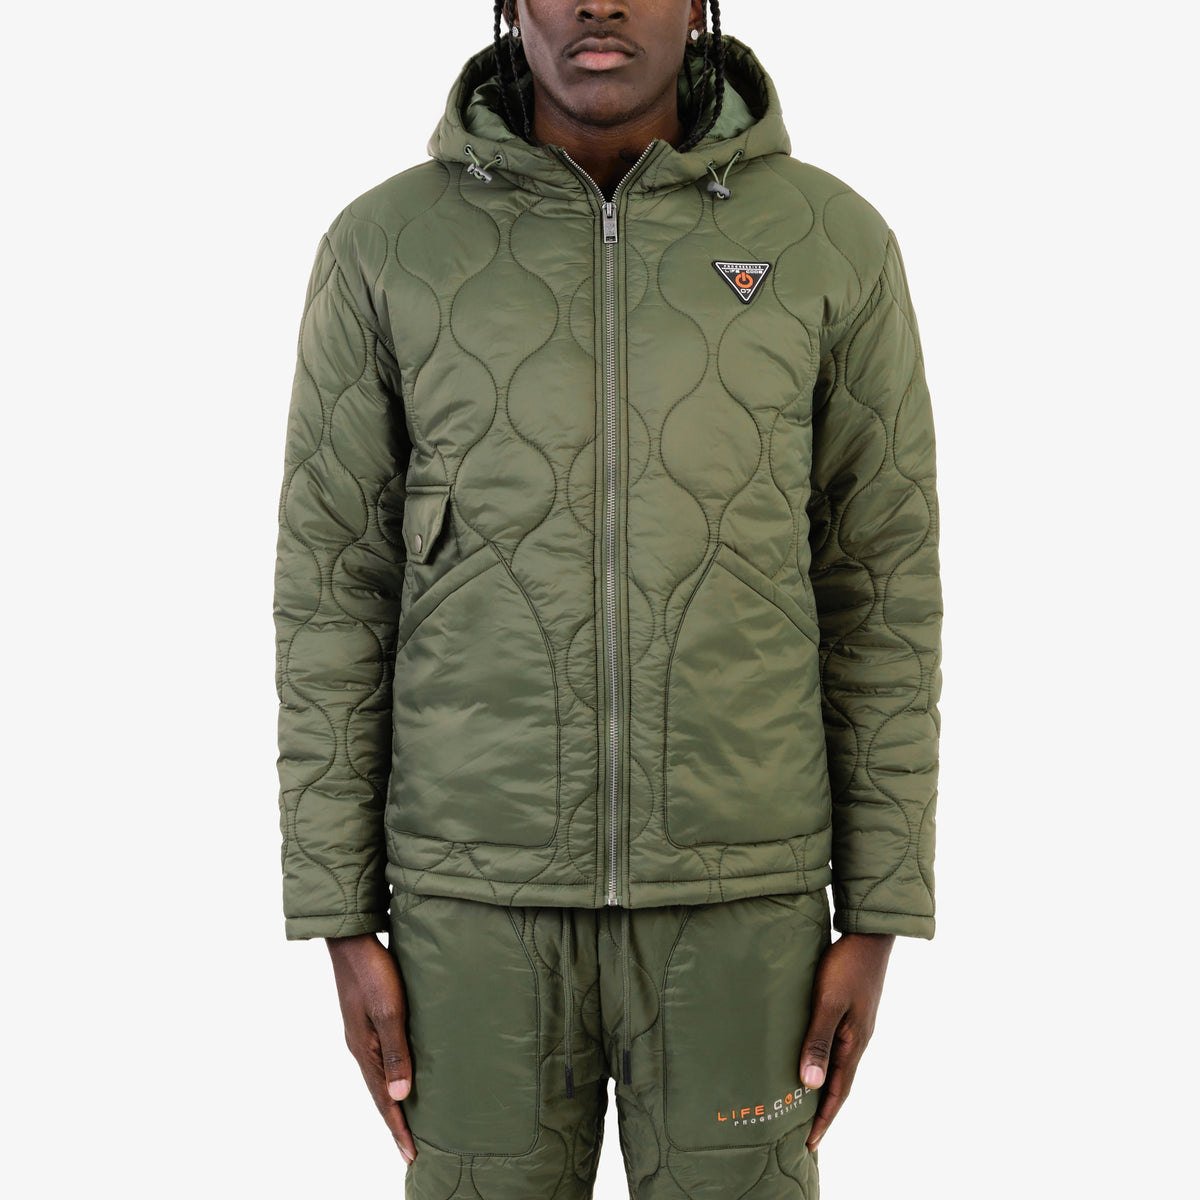 LIFE CODE OLIVE QUILTED JACKET